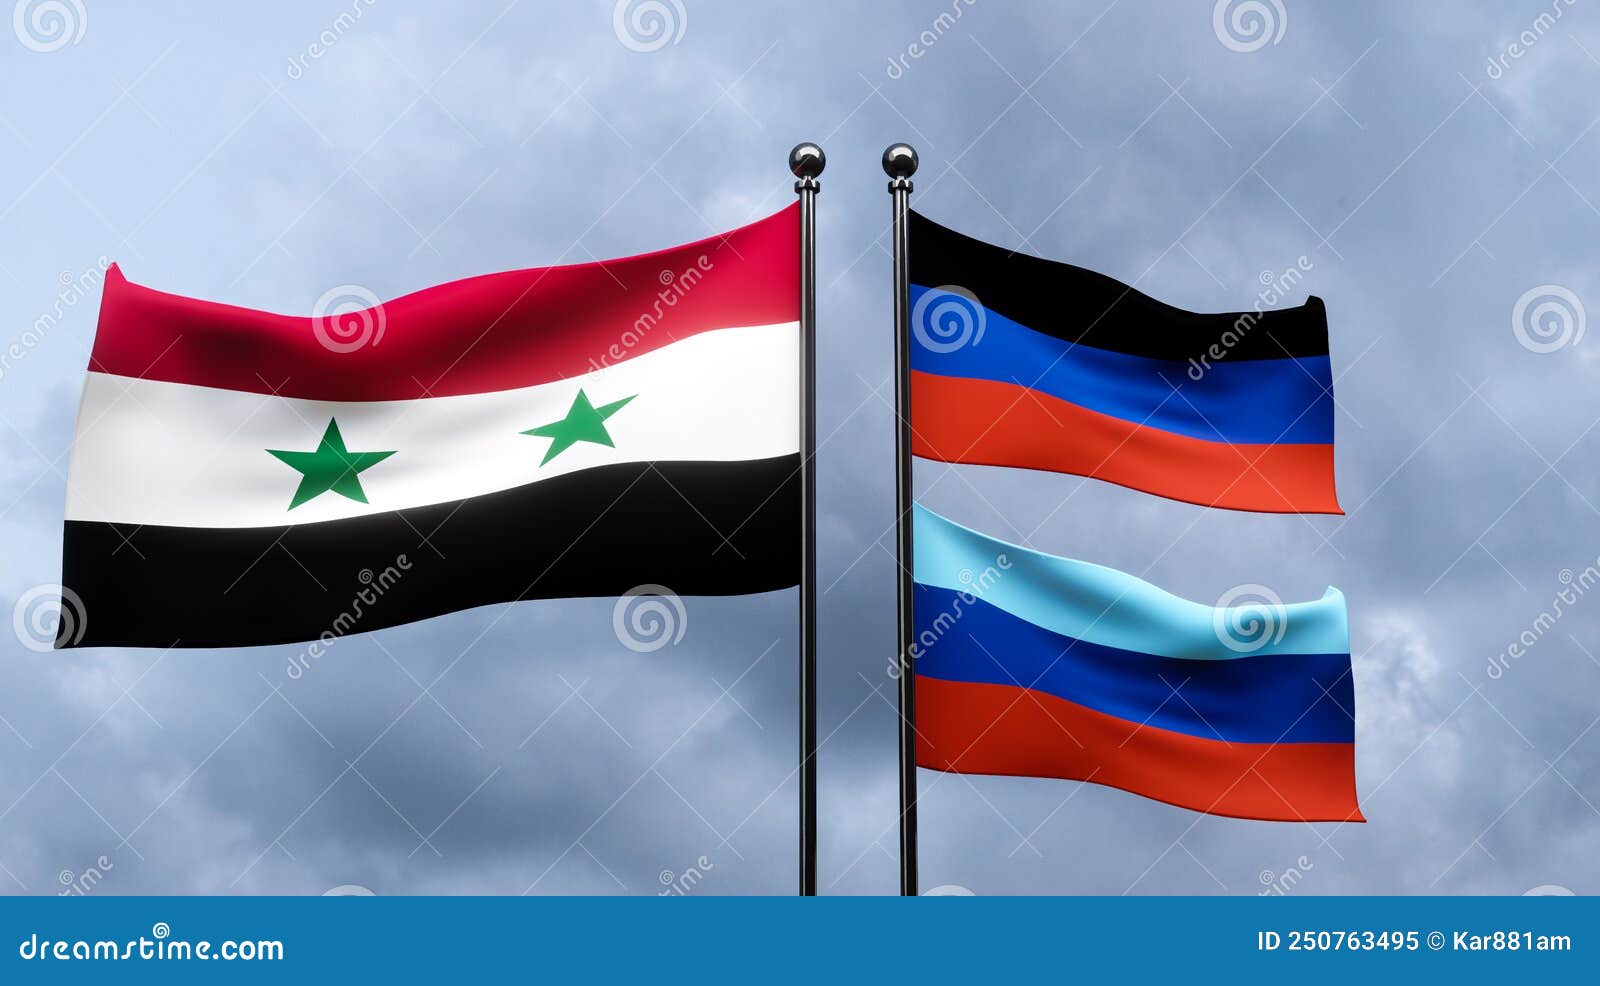 lnr and dnr and syria flags, blue sky and flag lnr flag lnr flag syria, lnr lnr syria, 3d work and 3d image